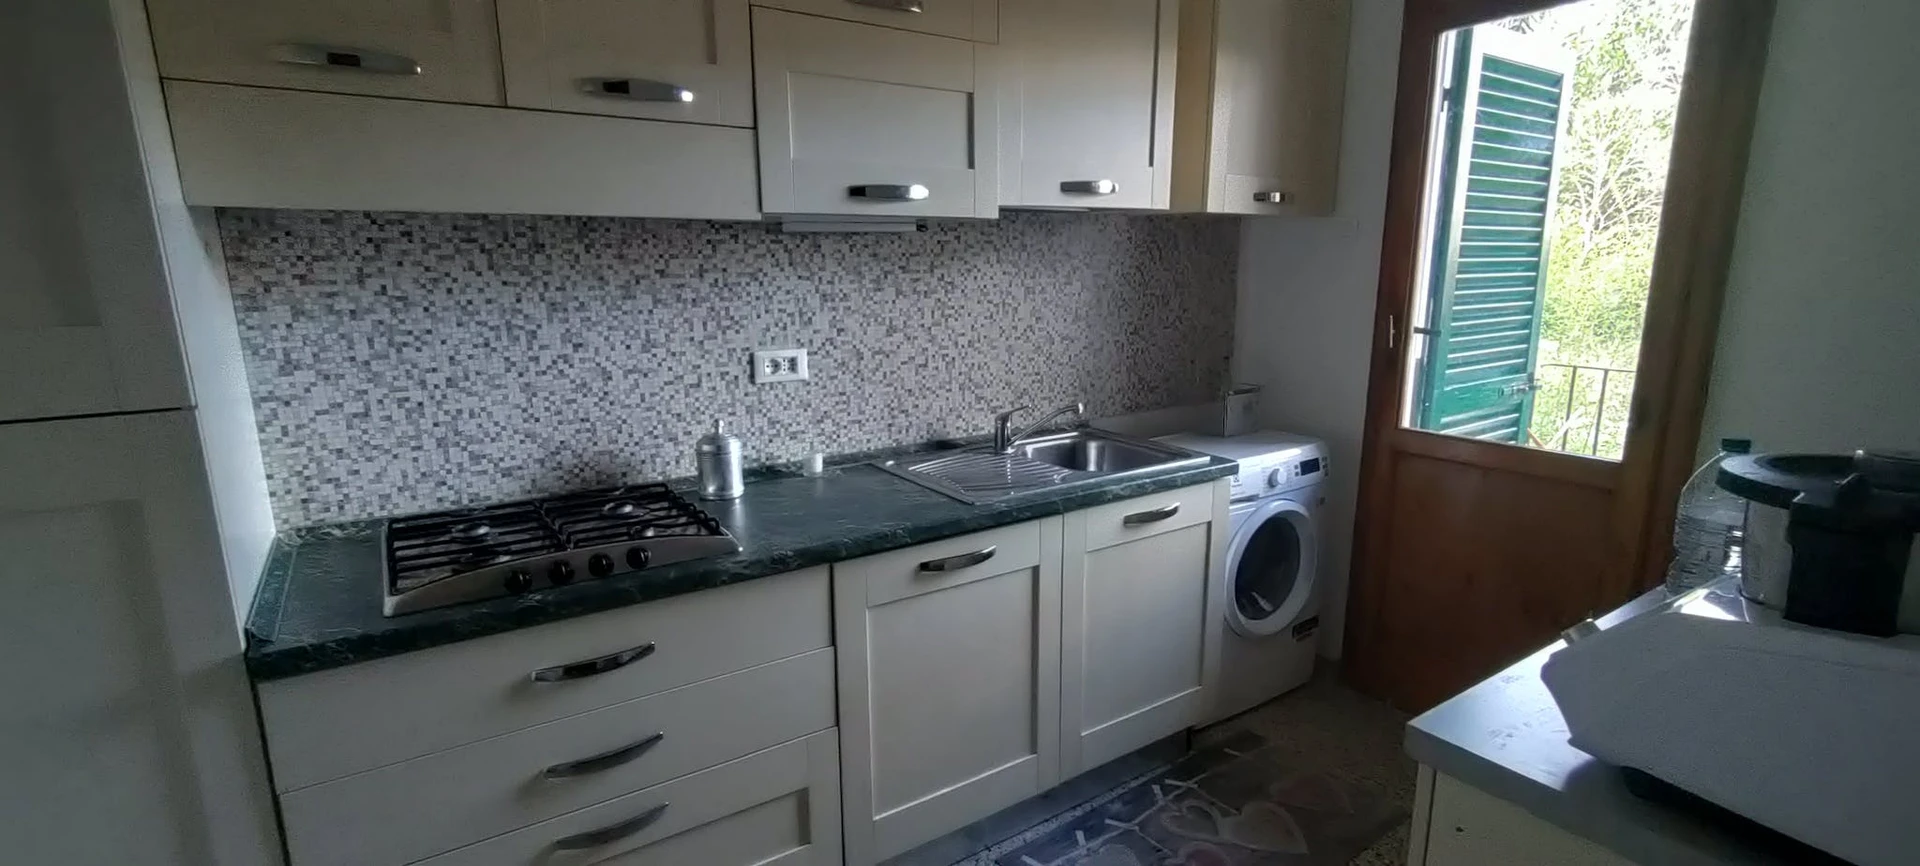 Room for rent in a shared flat in Pisa